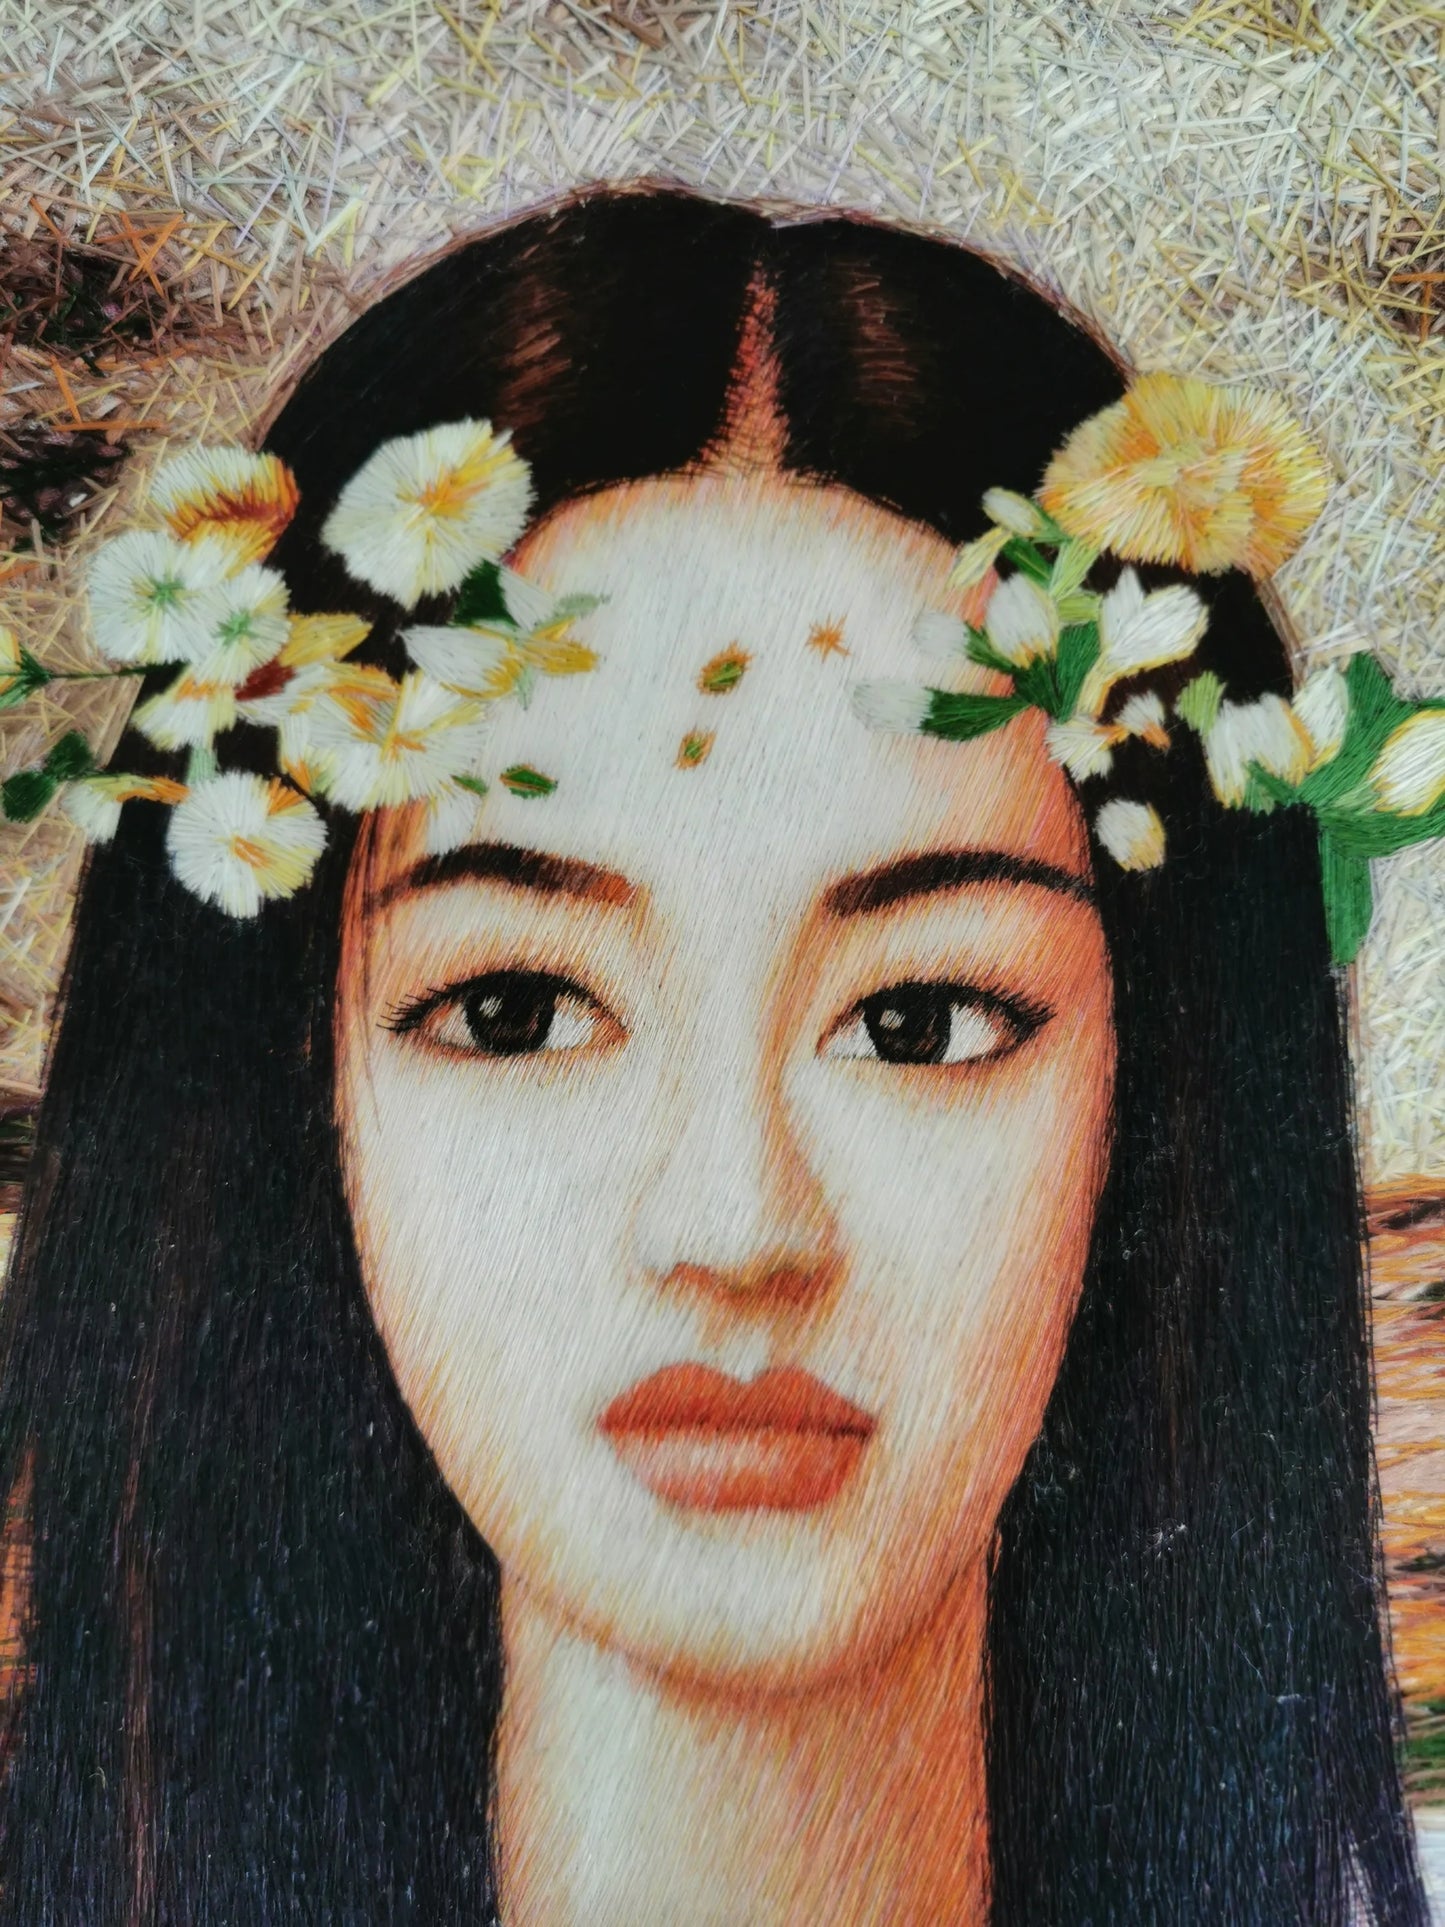 Girl's portrait Chinese handmade silk embroidery painting wall decor Suzhou Embroidery